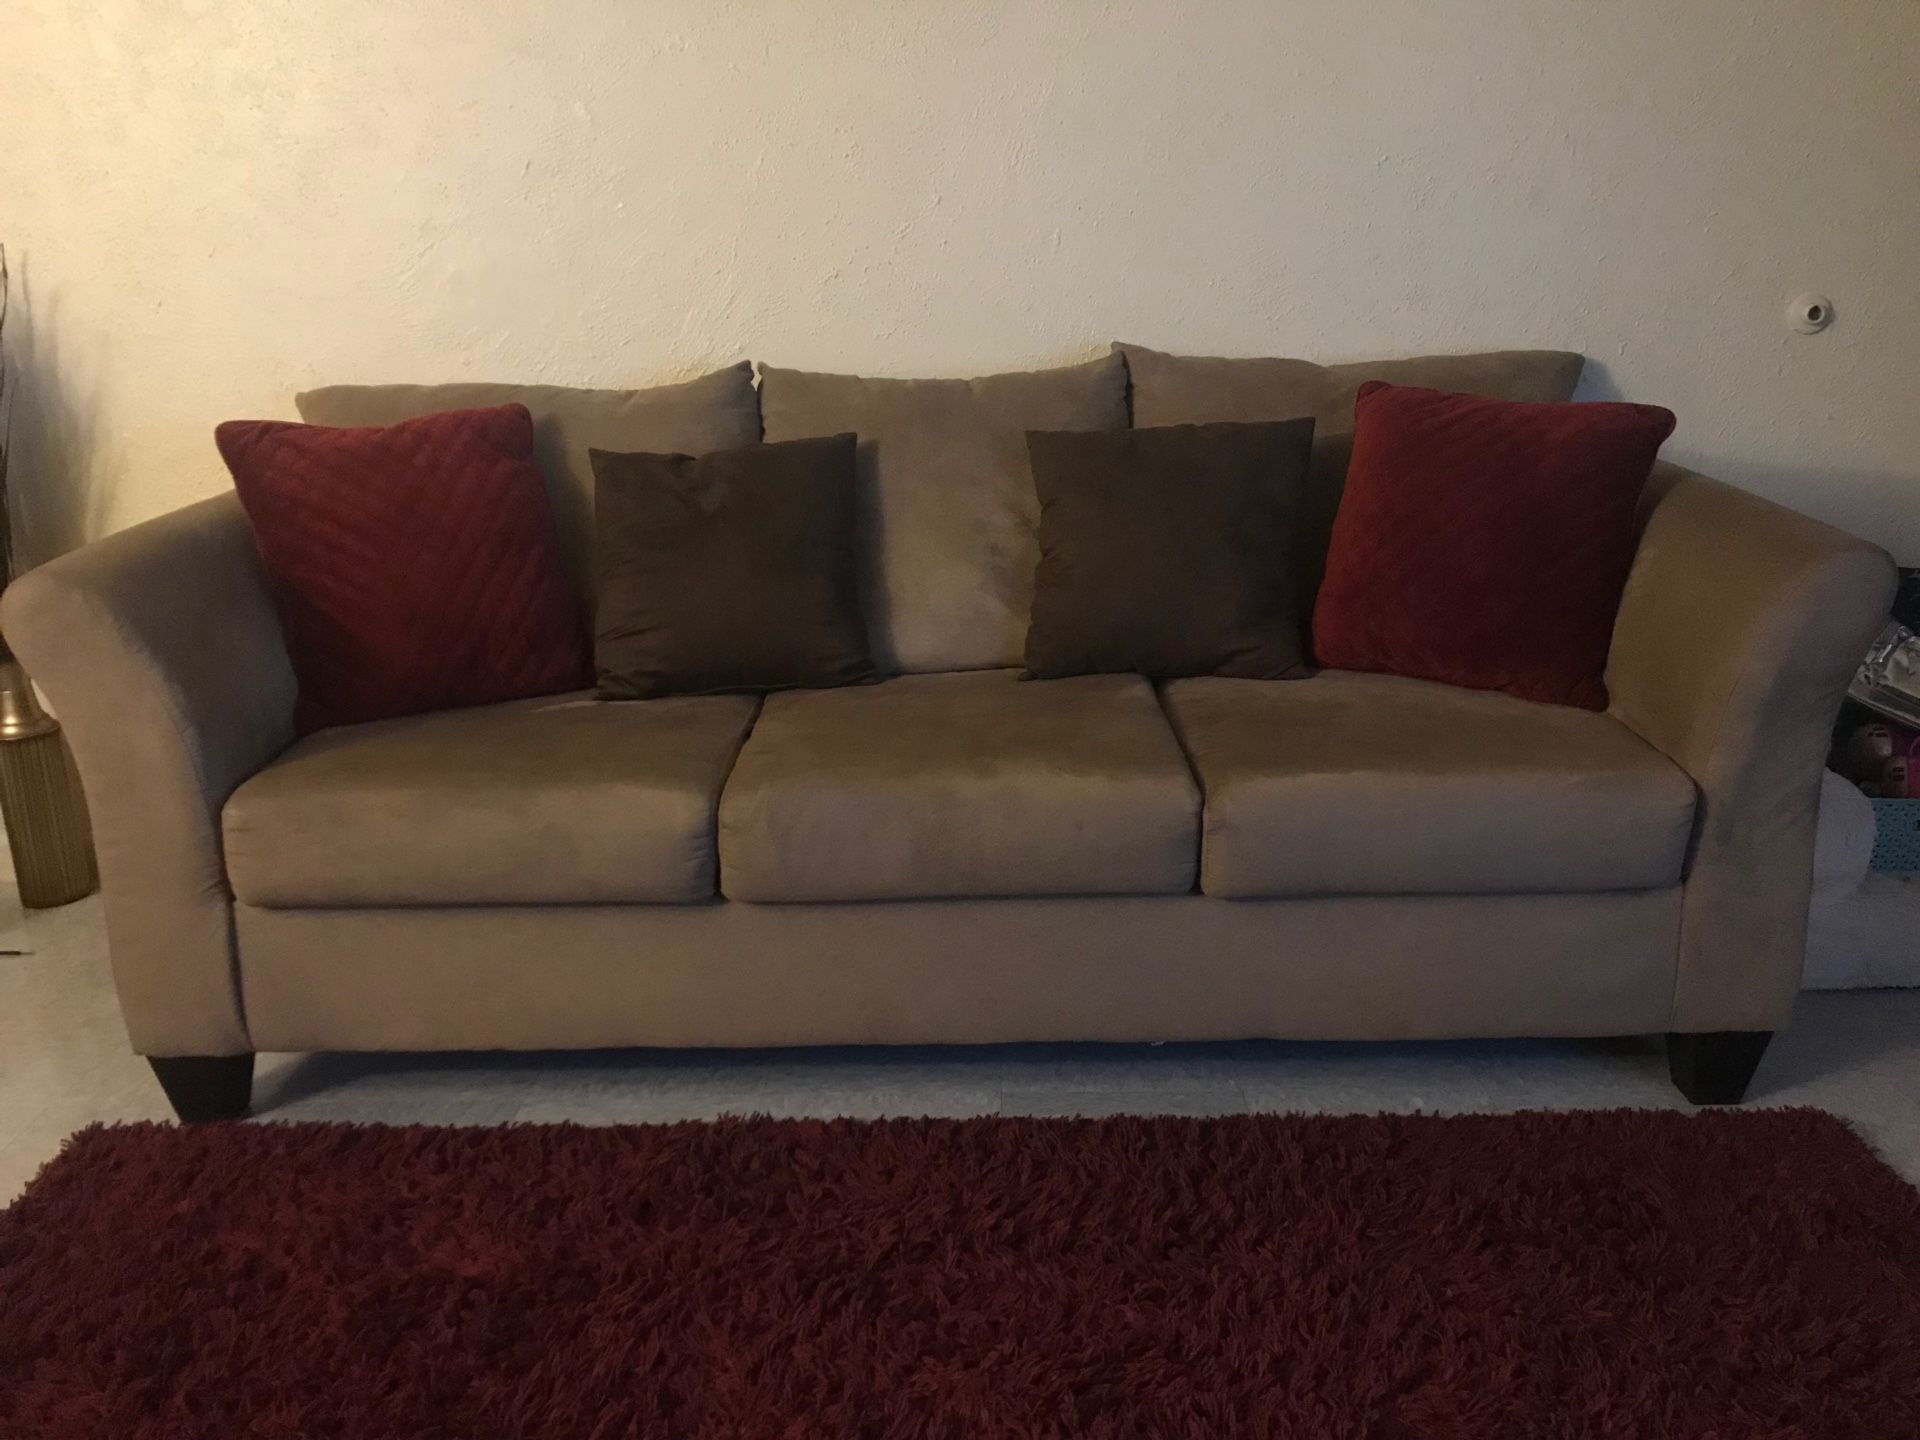 Suede couches